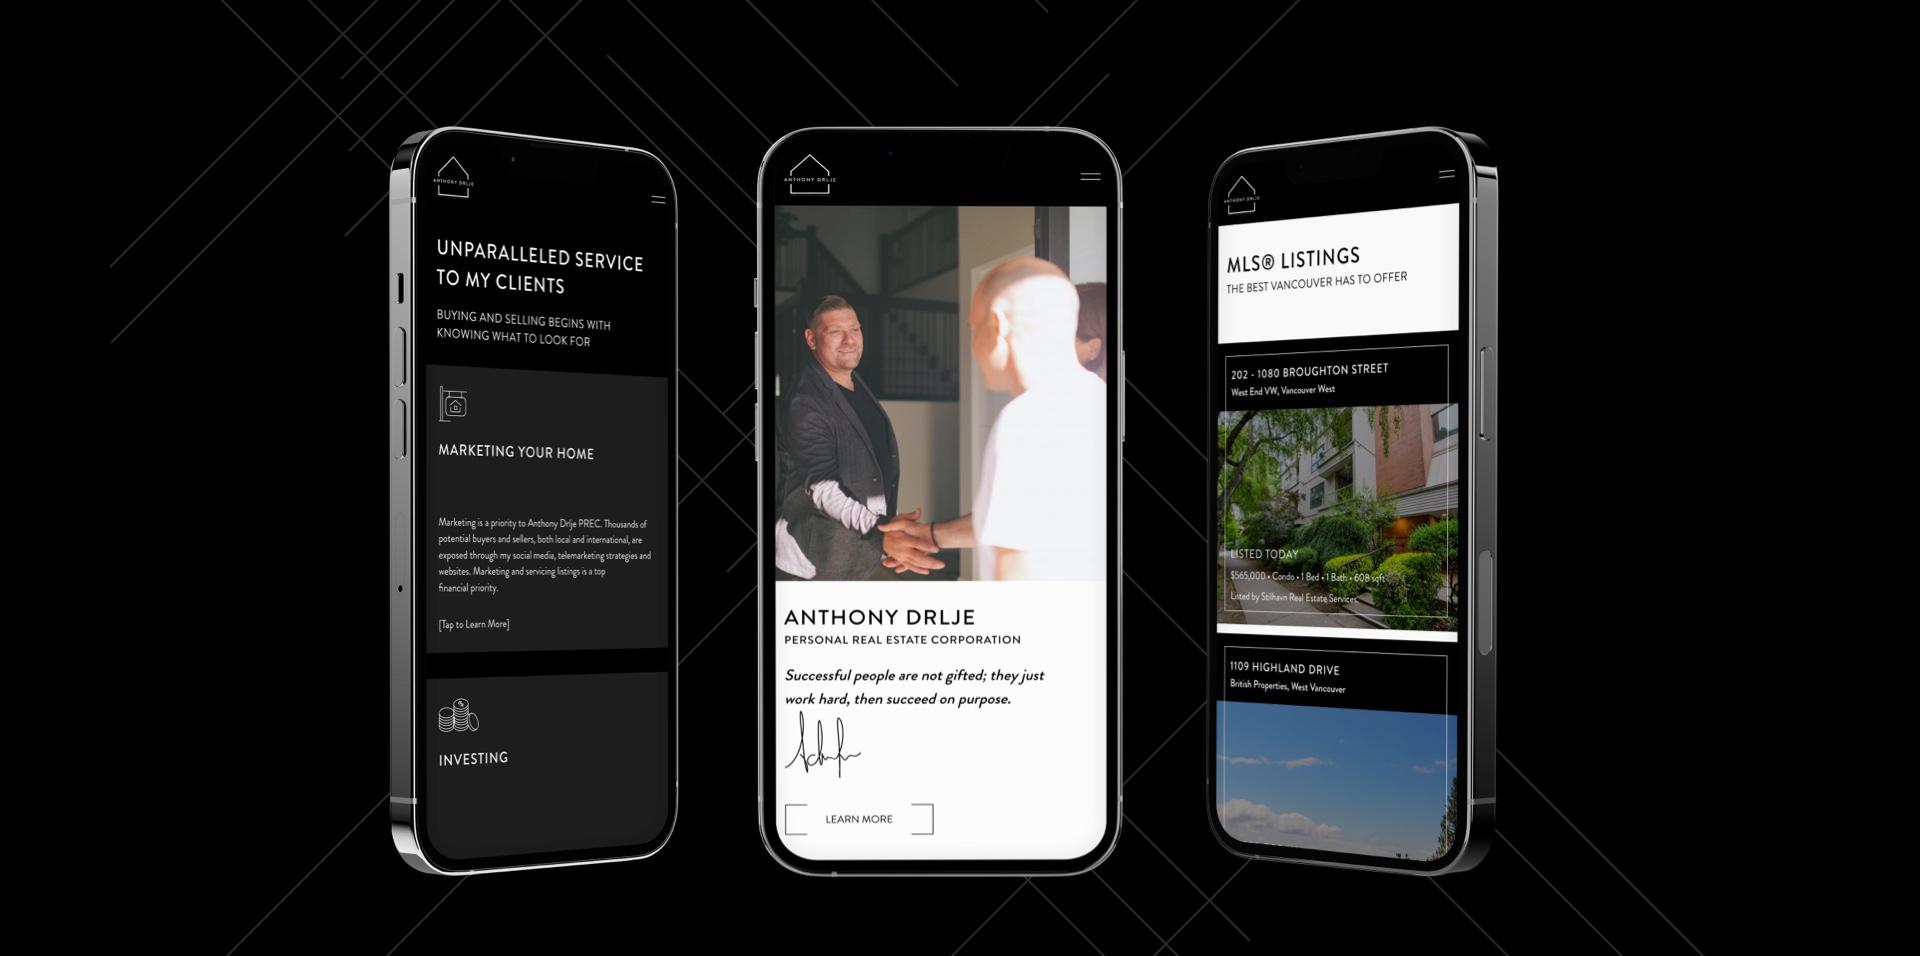 Three mobile phone mockups of Anthony Drjle's website